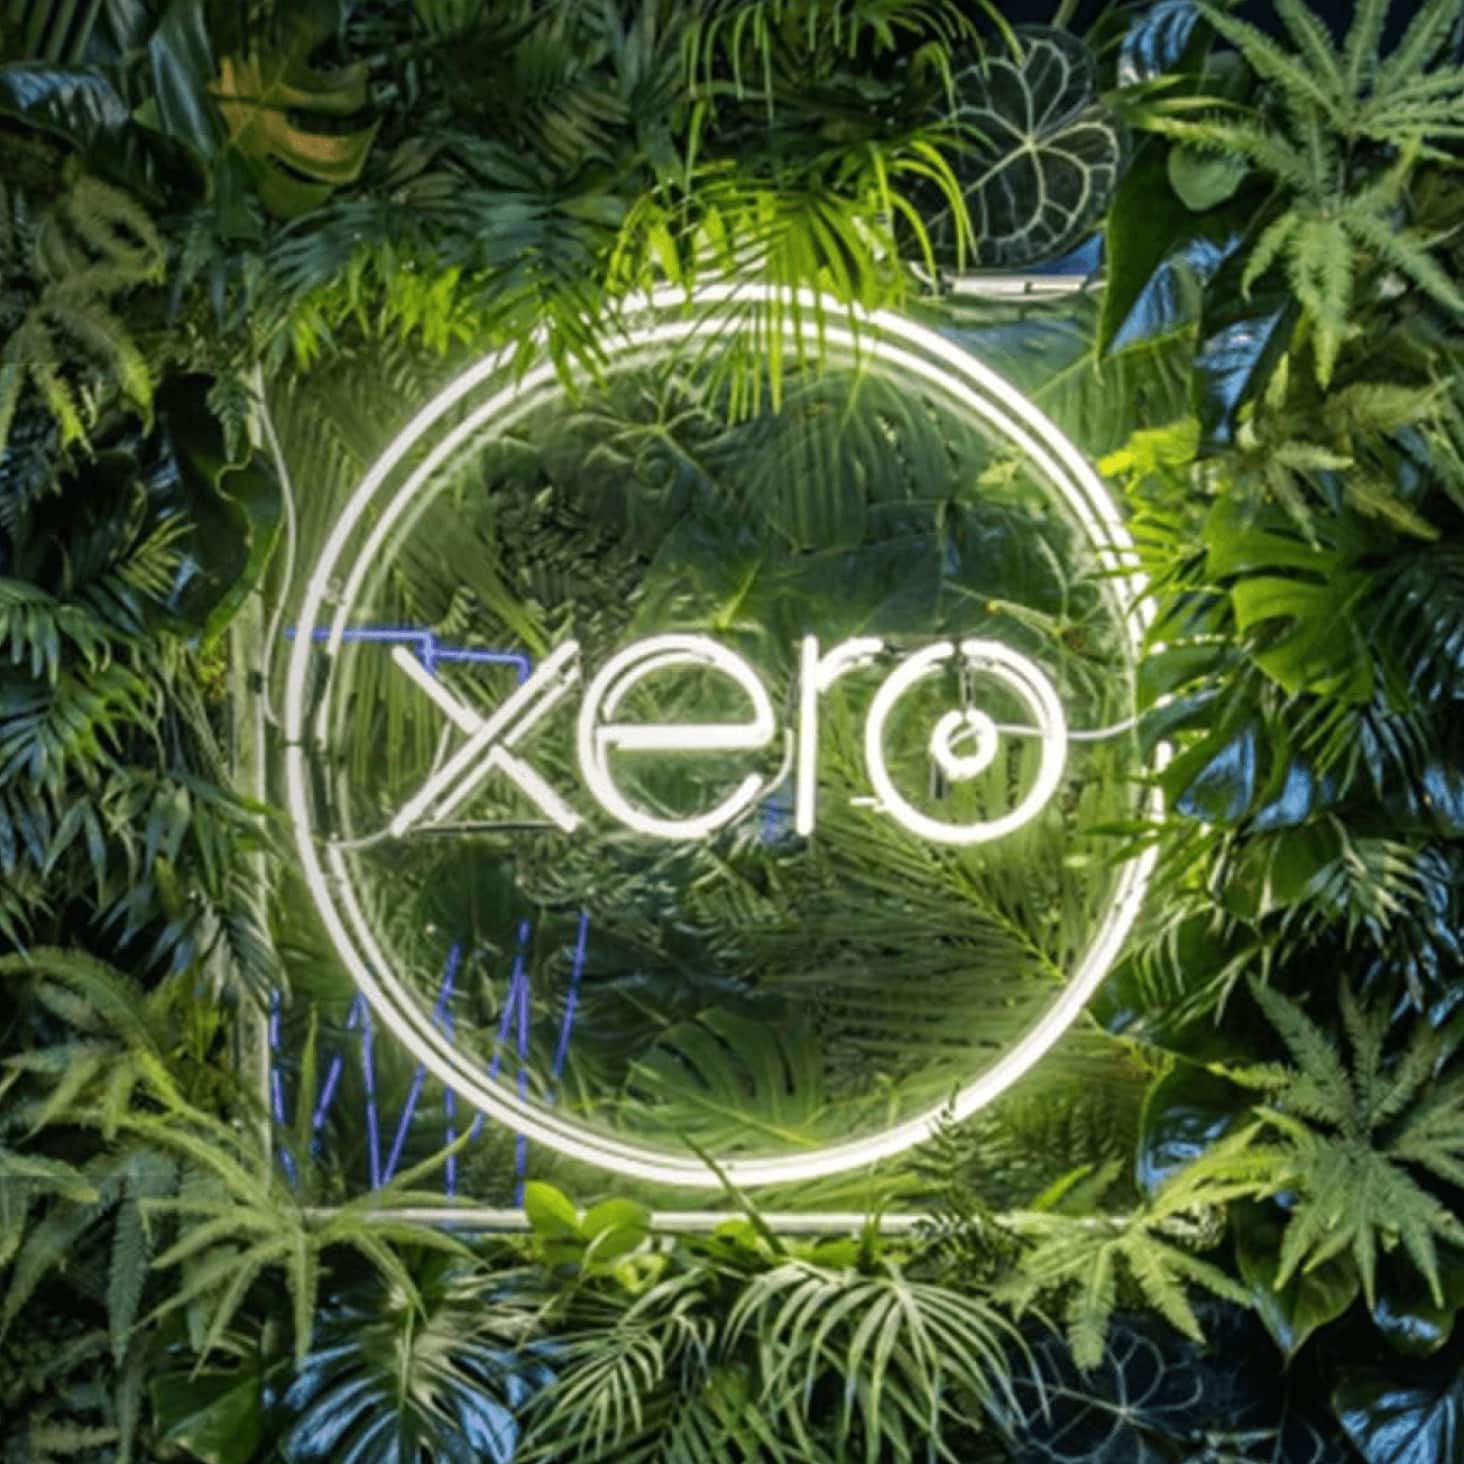 A Xero logo lights up against a backdrop of greenery in celebration of the many awards Xero has received in its regions.